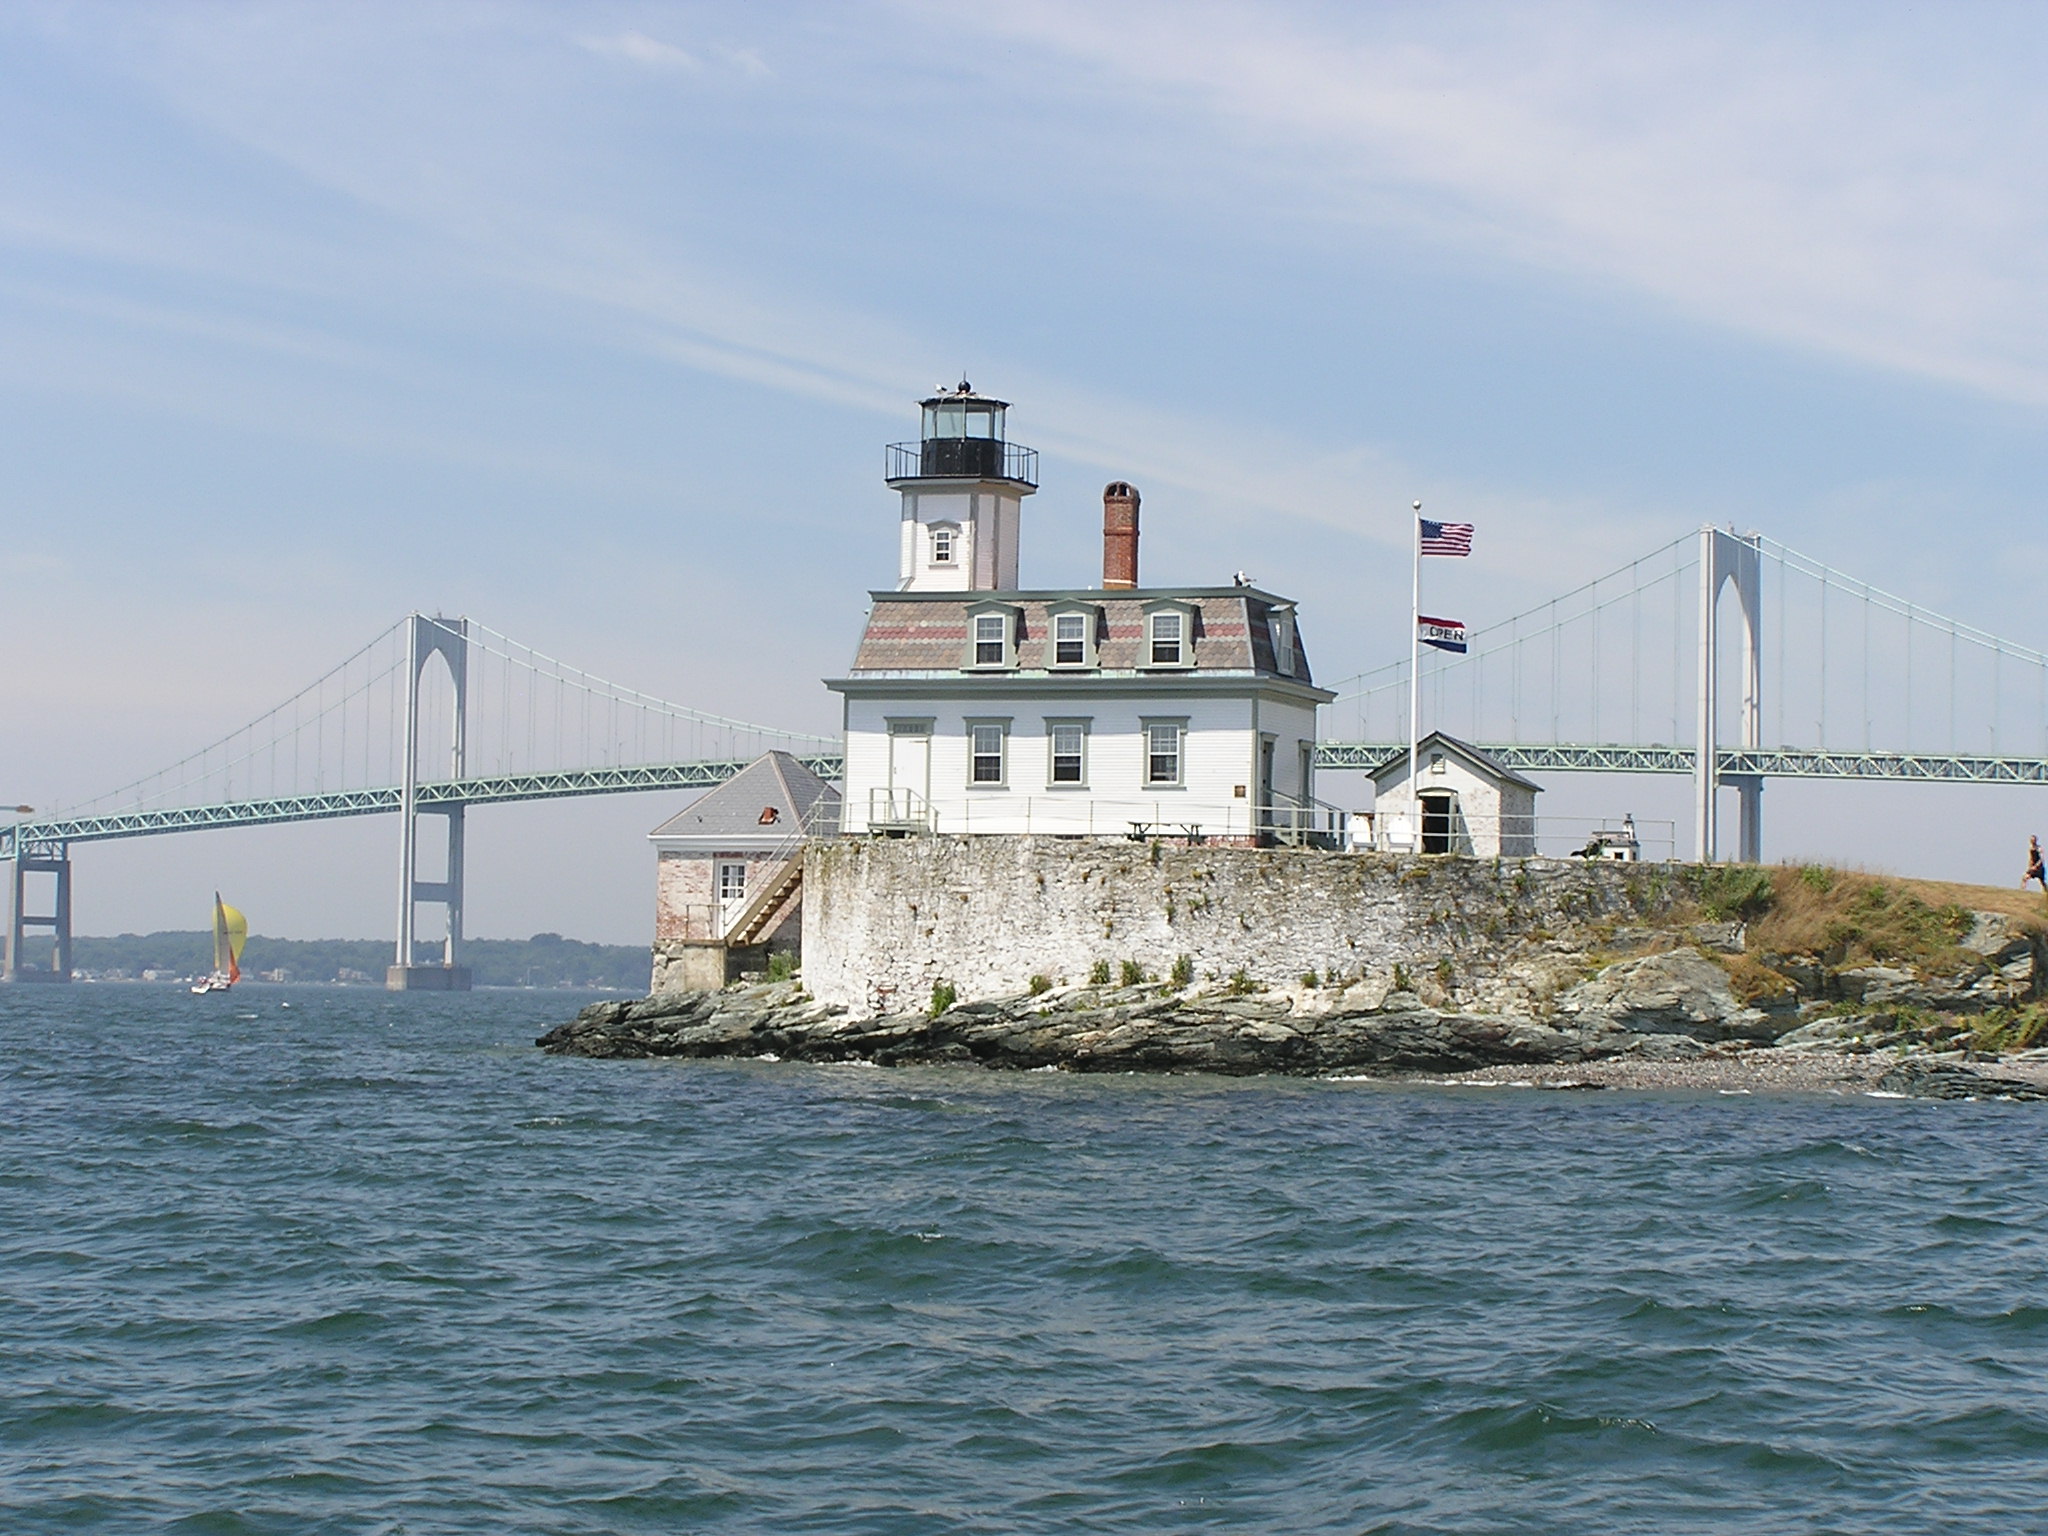 A white lighthouse sits on a stone foundation outcropping on Narragansett Bay. The water reaches the stones at the bottom of the foundation, and the blue-green Newport Bridge is visible in the background